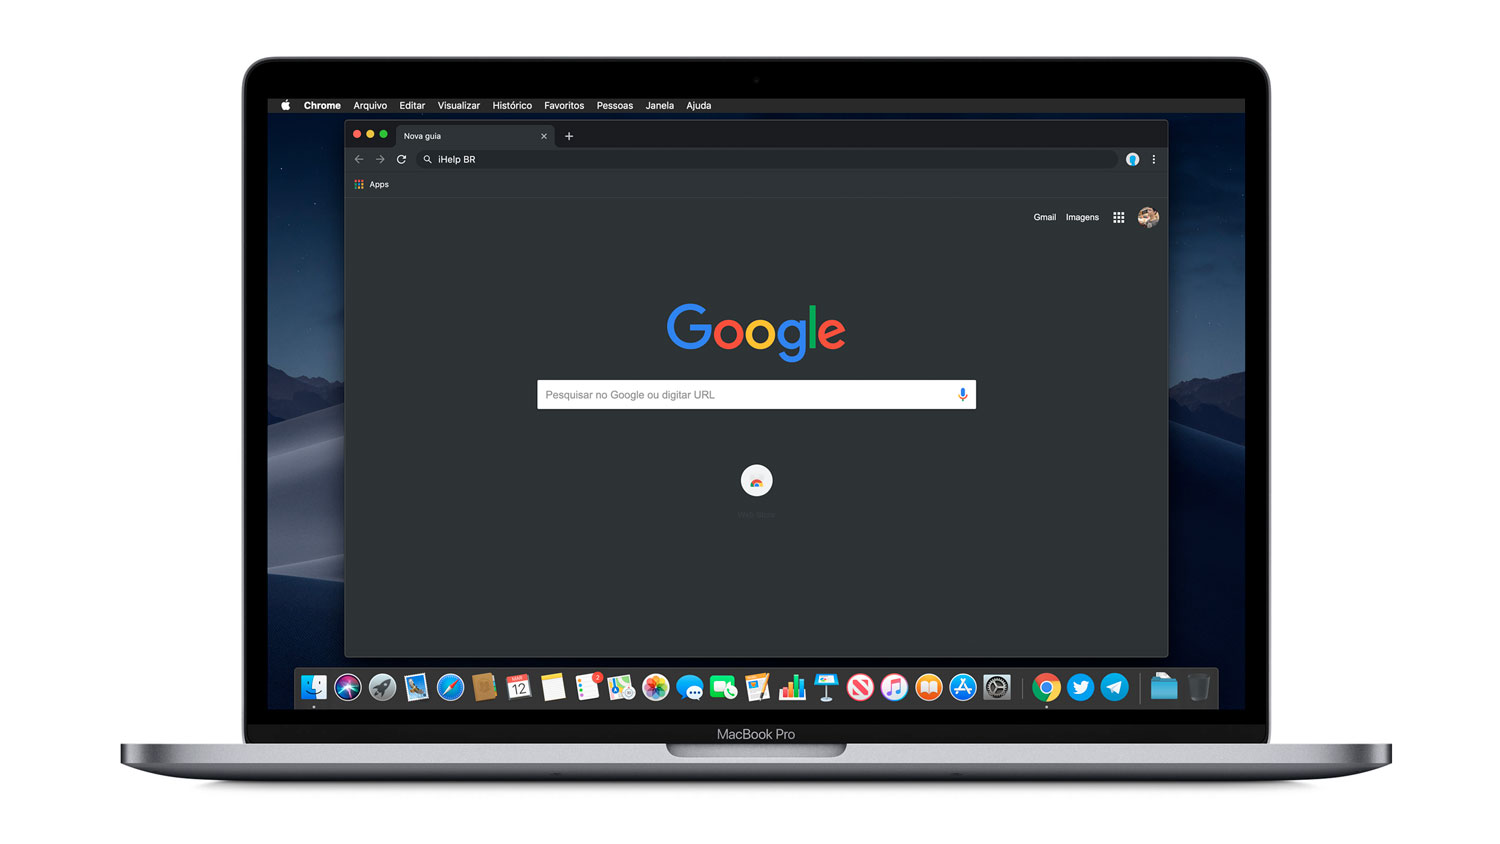 chrome for mac 10.4.11 free download